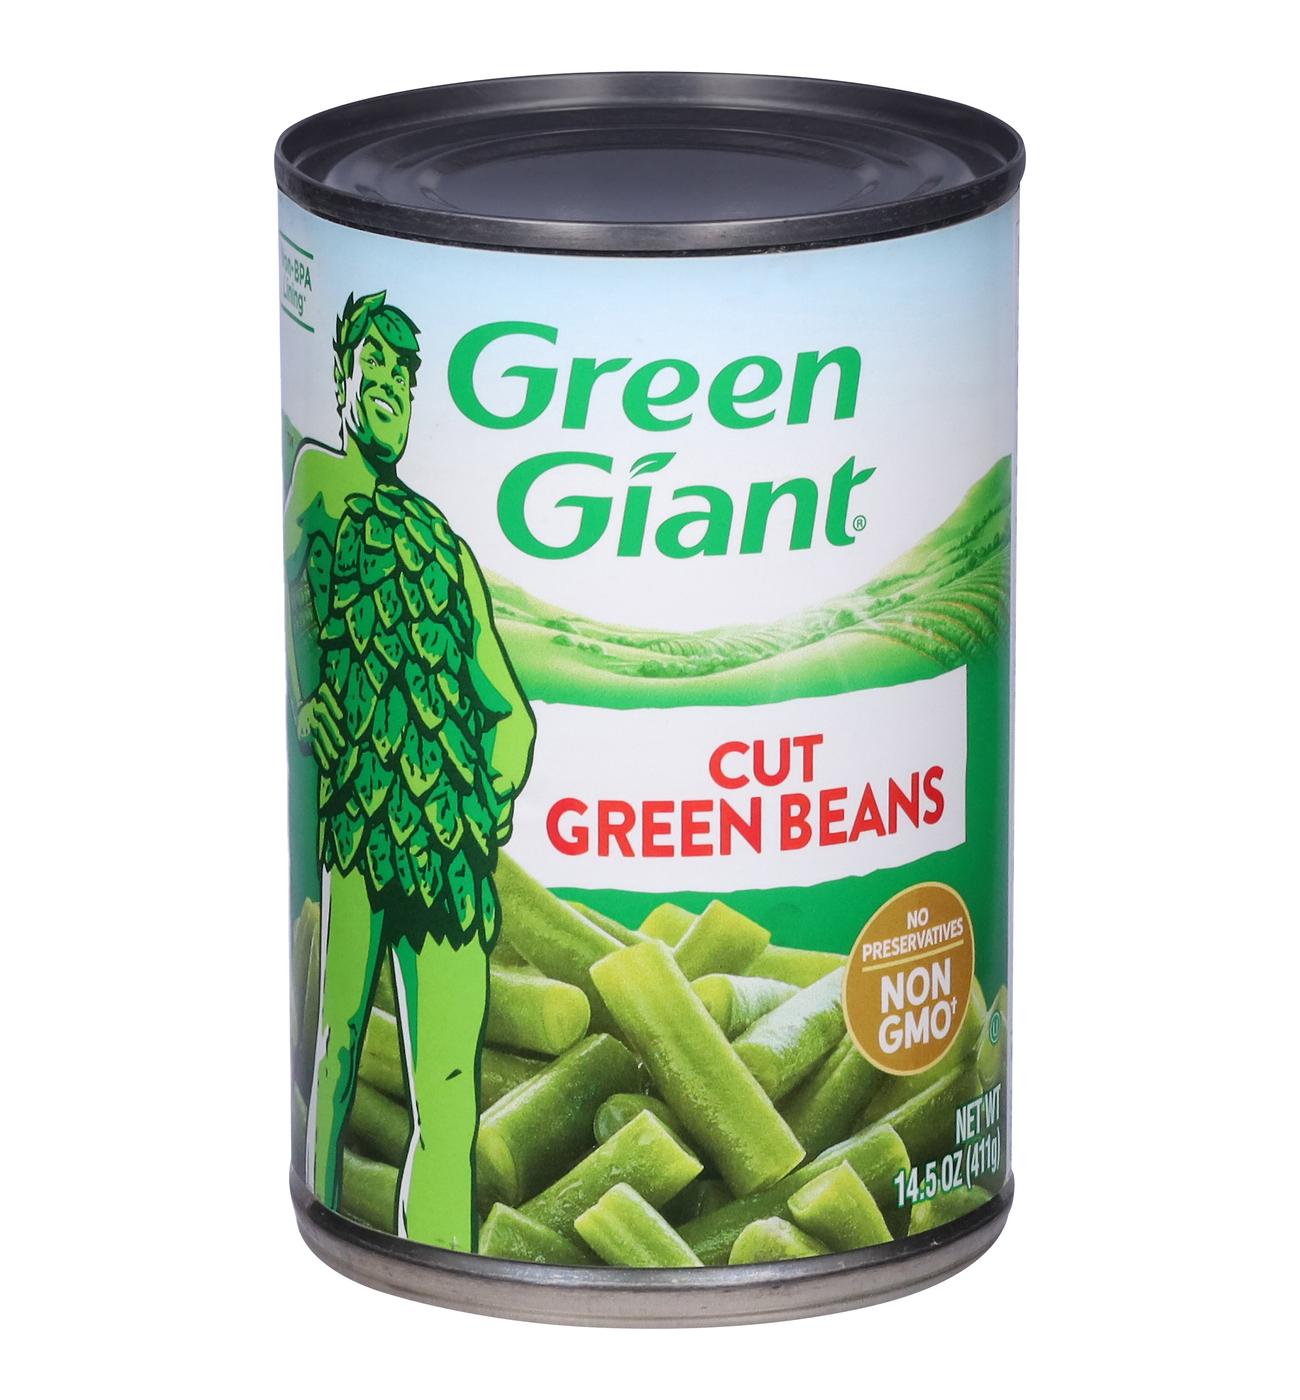 Green Giant Cut Green Beans; image 1 of 3